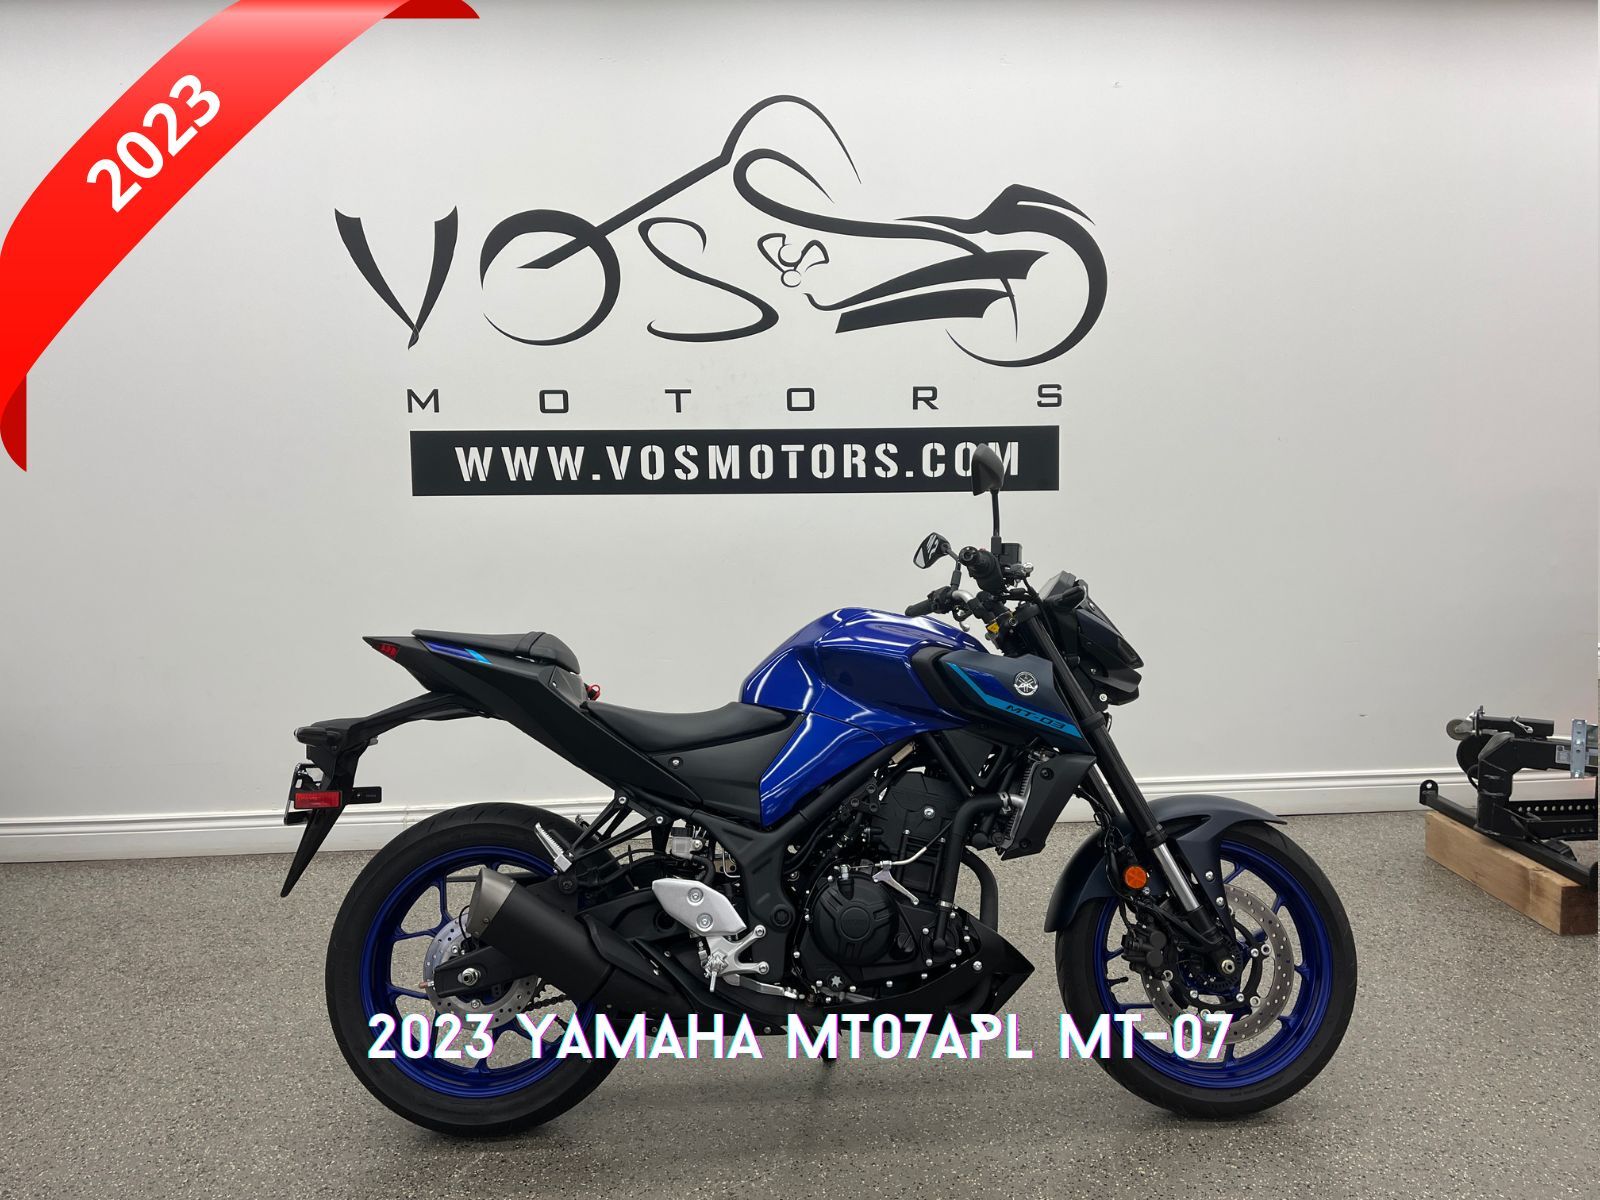 2023 Yamaha MT03APB MT-03 ABS - V5808 - -No Payments for 1 Year**